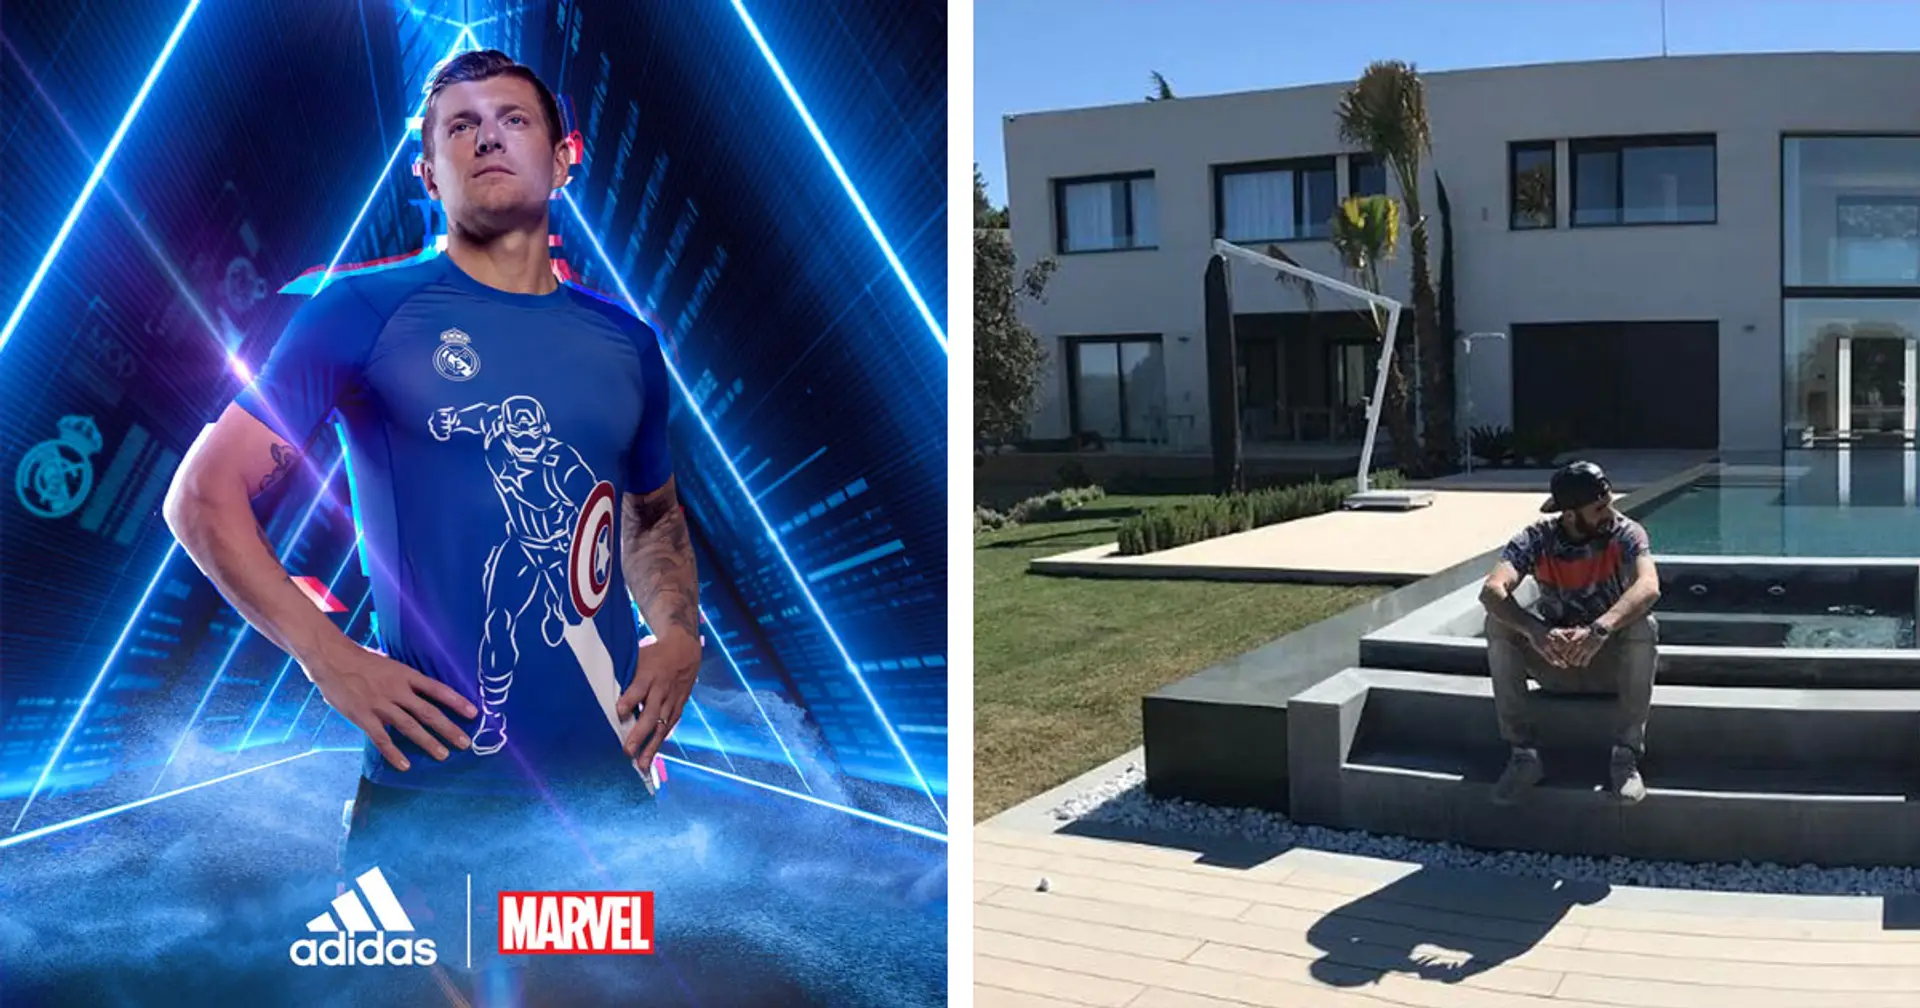 Madrid to wear Captain America shirts in Girona warm-up and 3 more under-radar stories